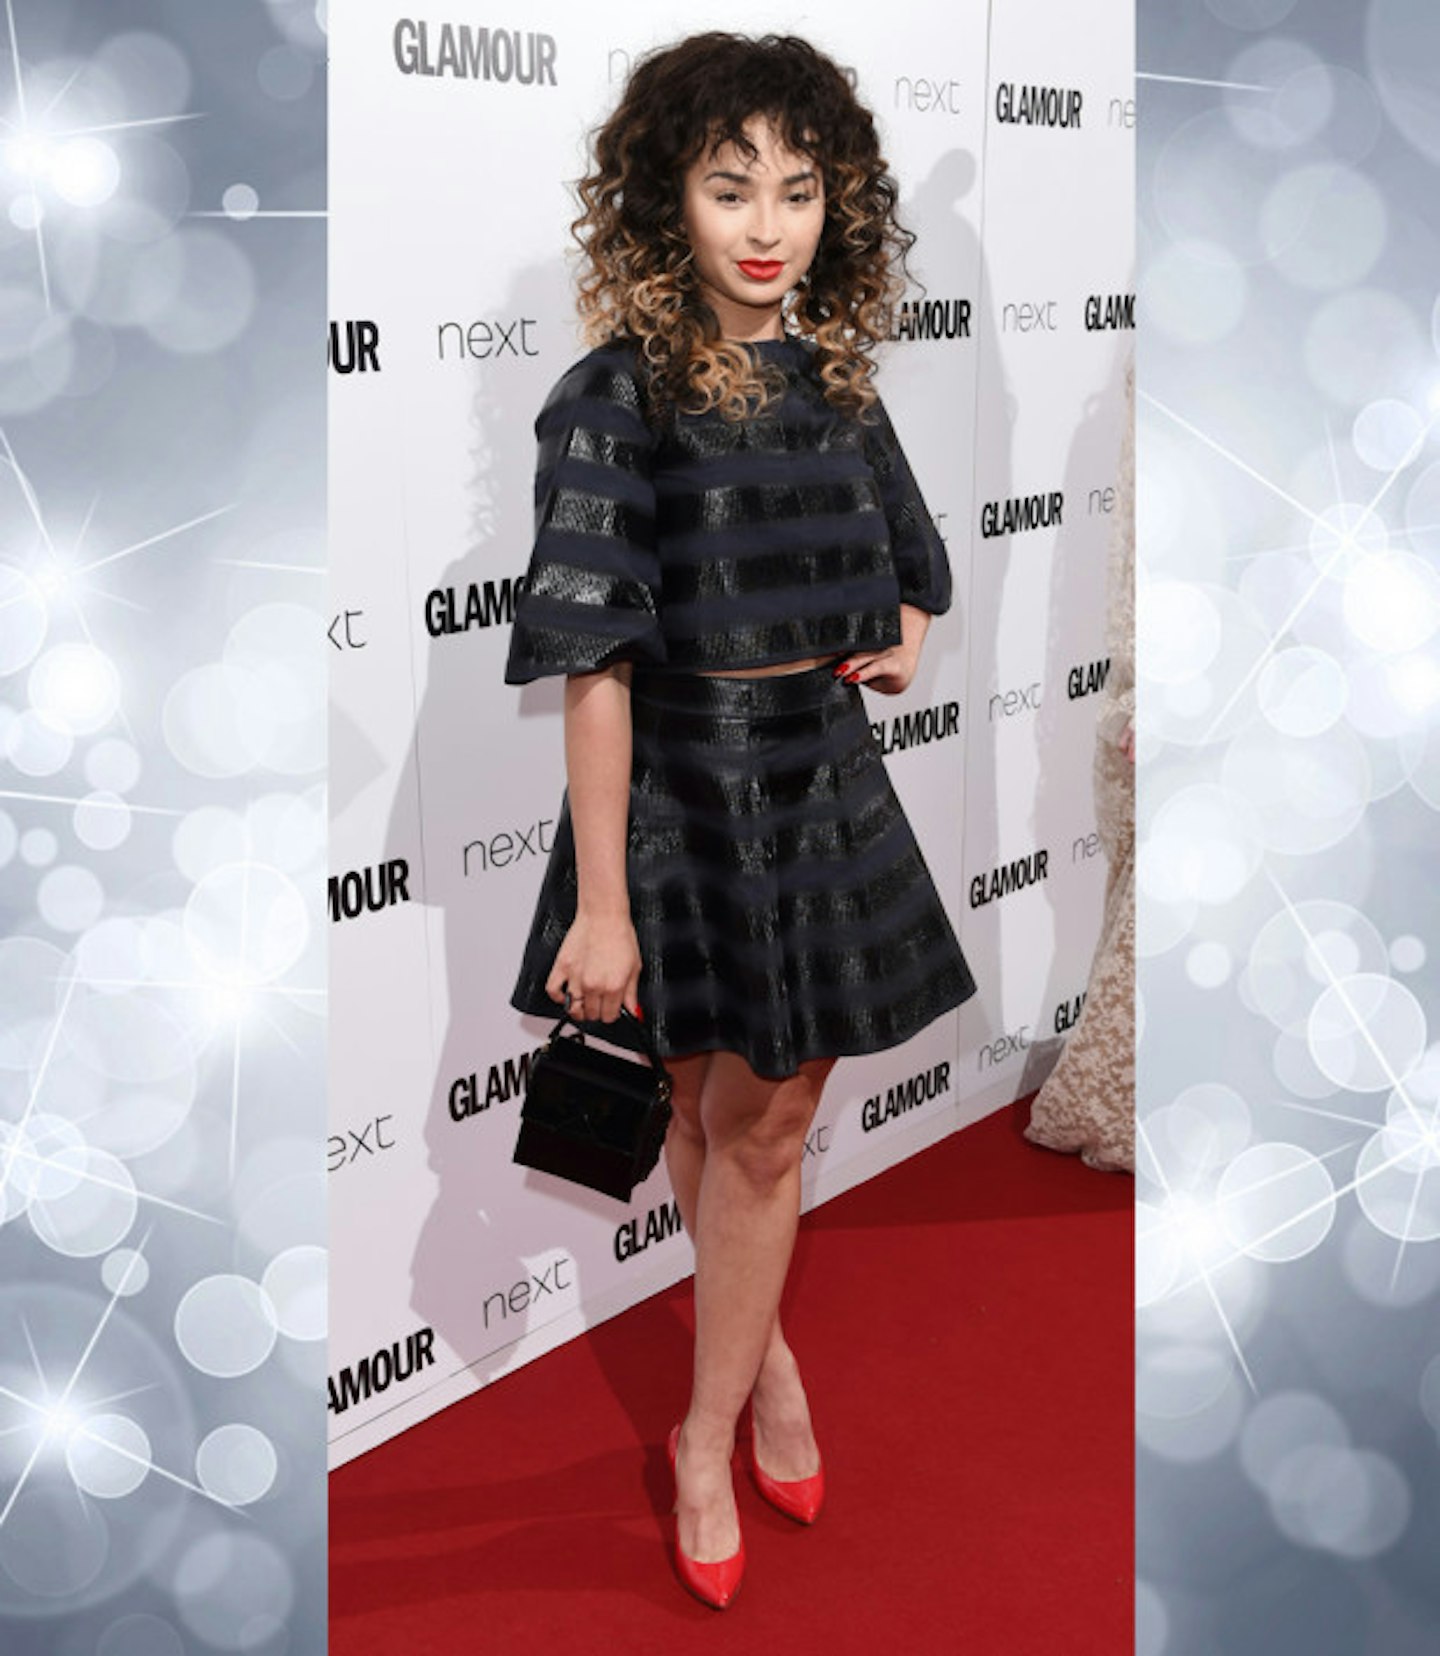 glamour-awards-outfits-ella-eyre-black-crop-top-skirt